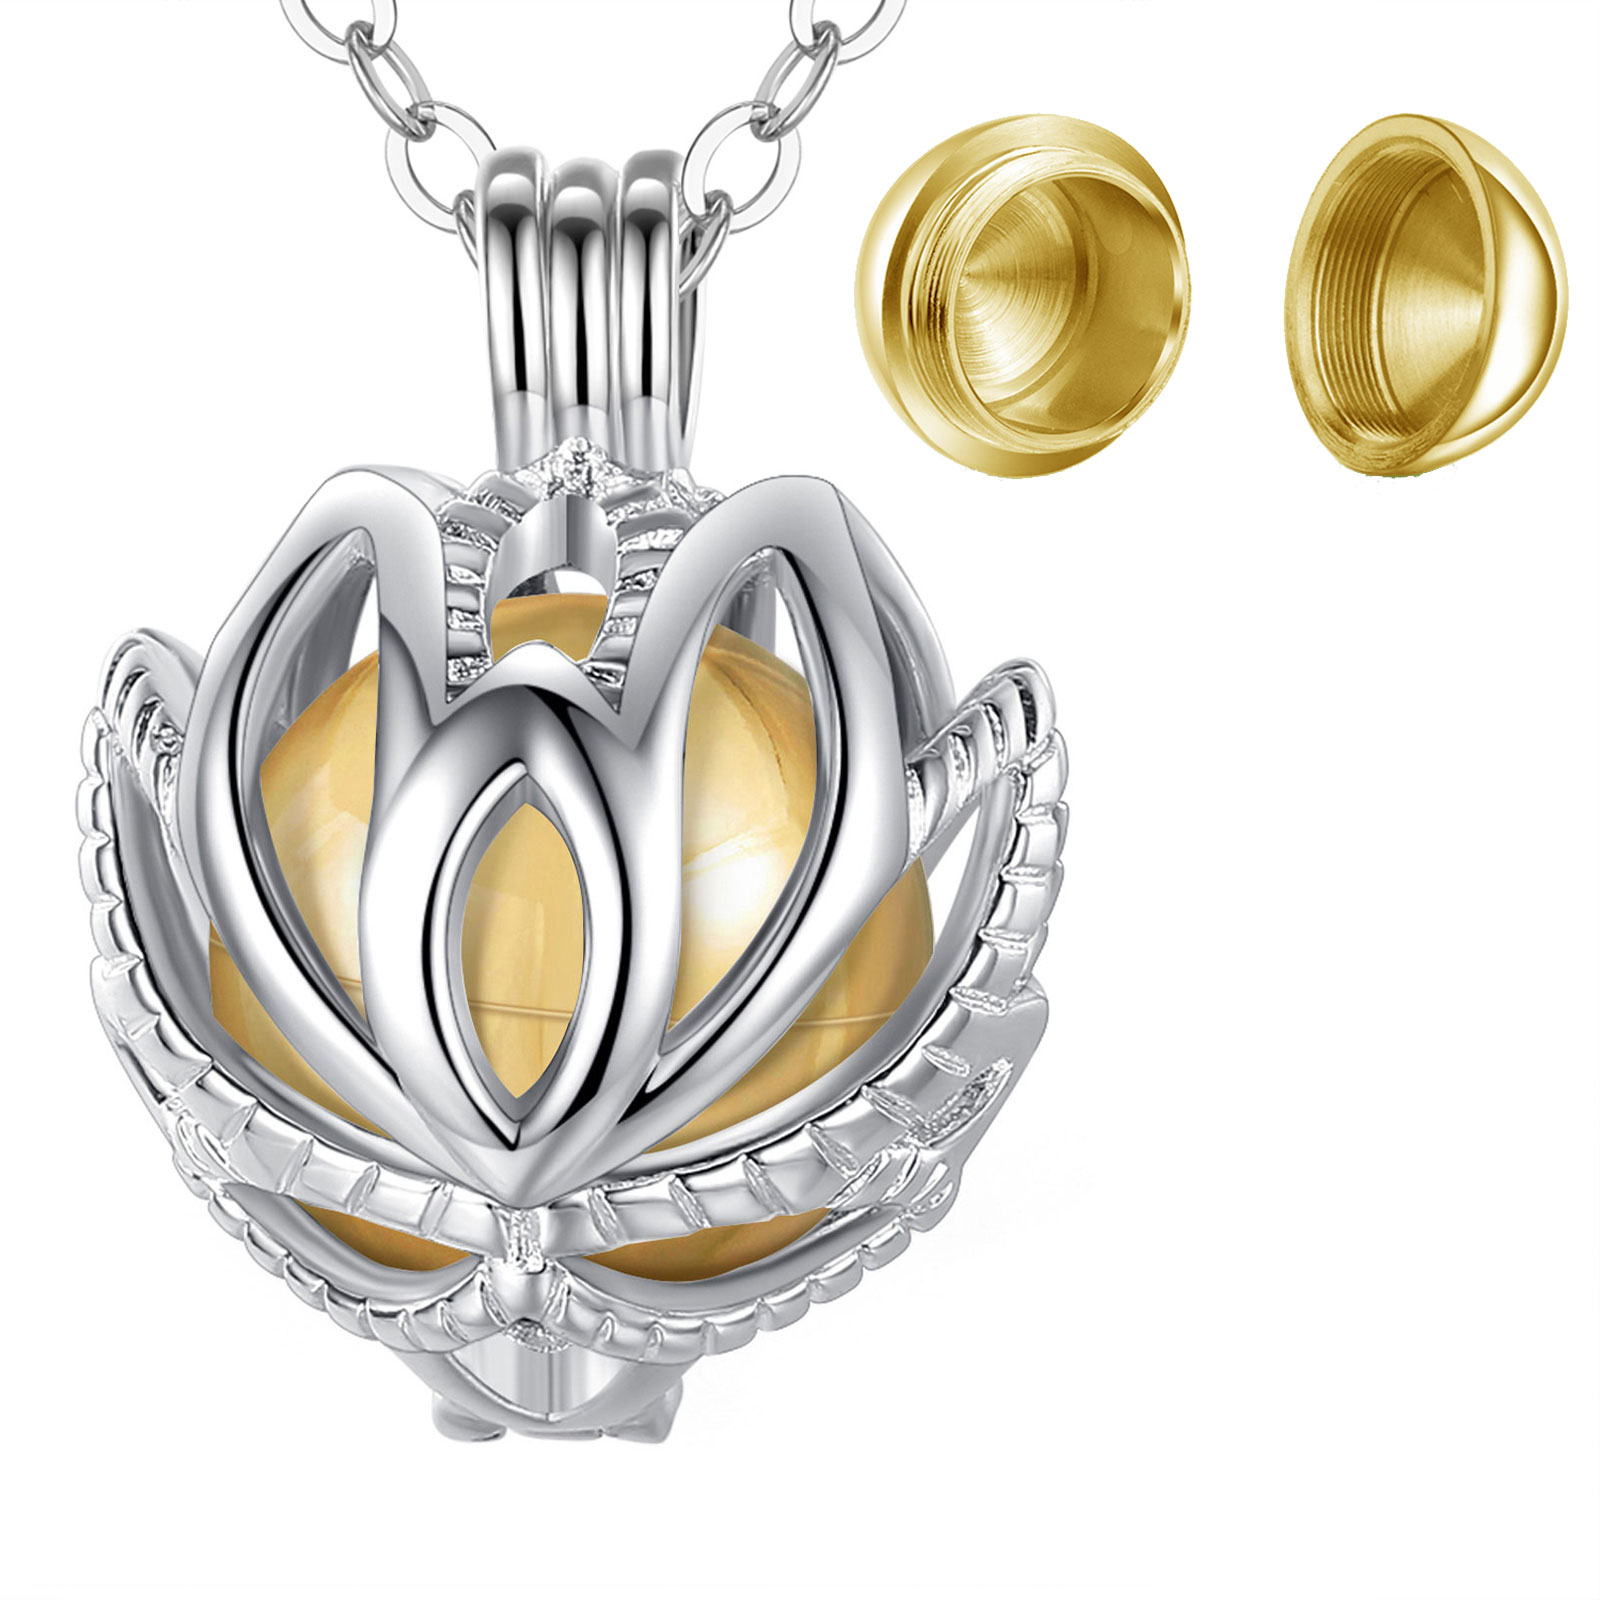 Merryshine Ashes Jewelry S925 Sterling Silver Cremation Urn Lotus Pendant Necklace